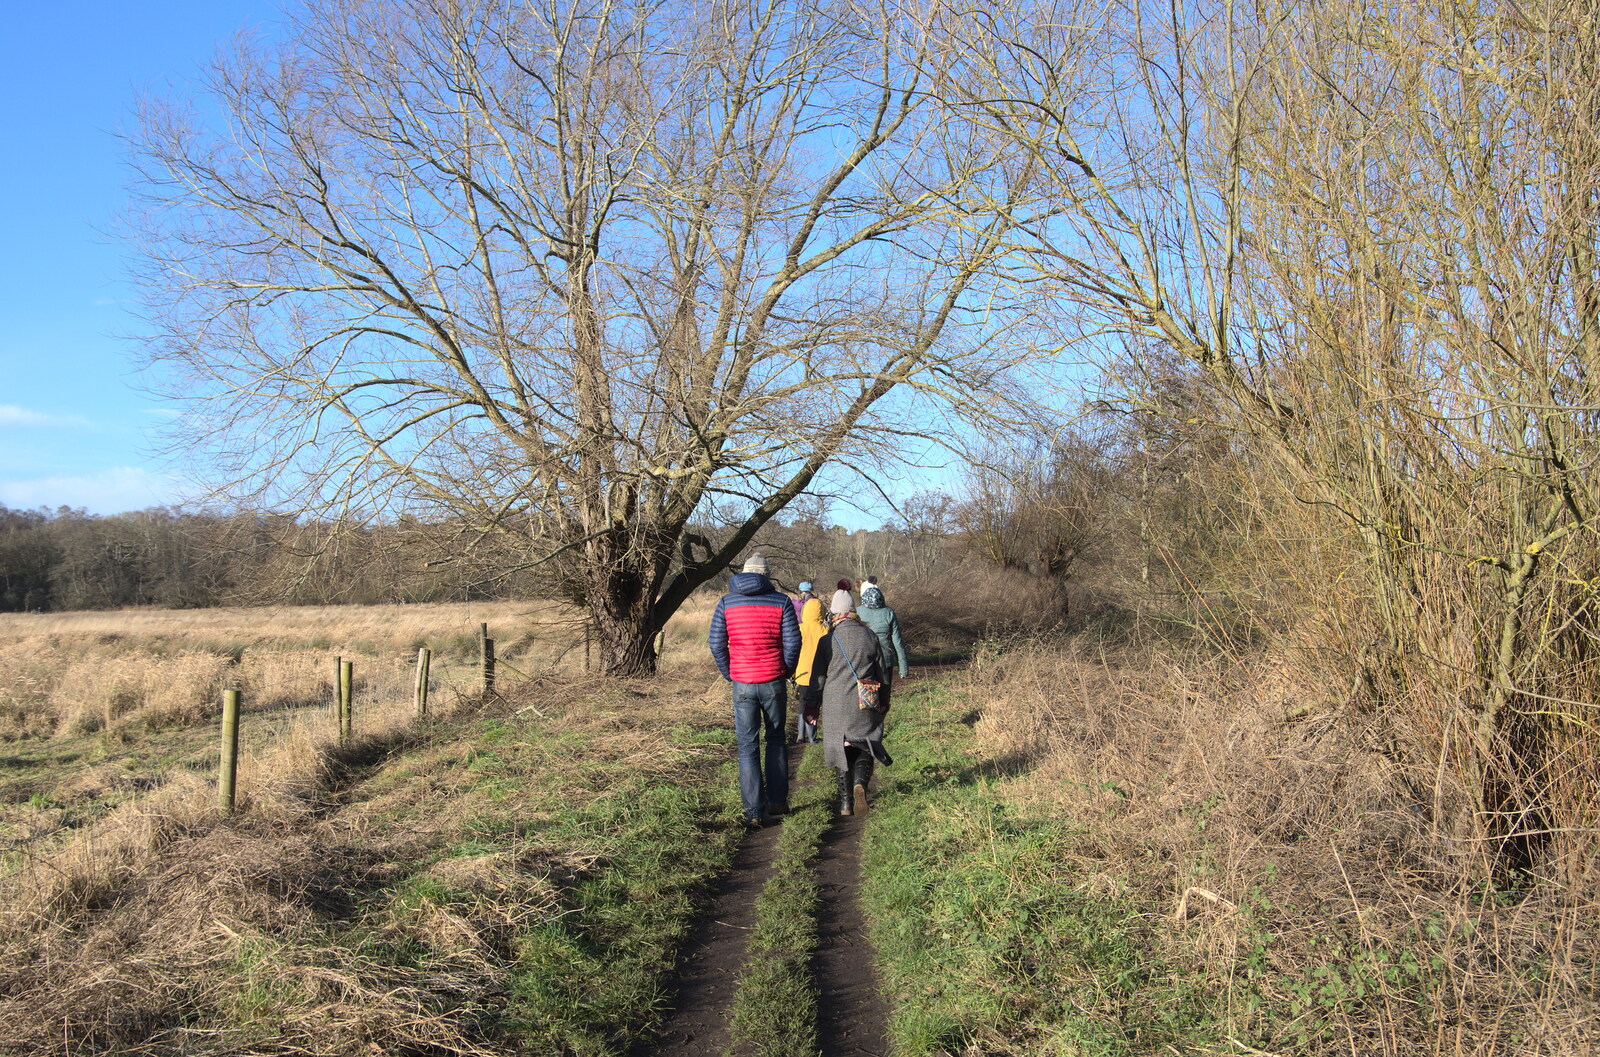 The walking continues from A Walk Around Knettishall Heath, Thetford, Norfolk - 2nd January 2022